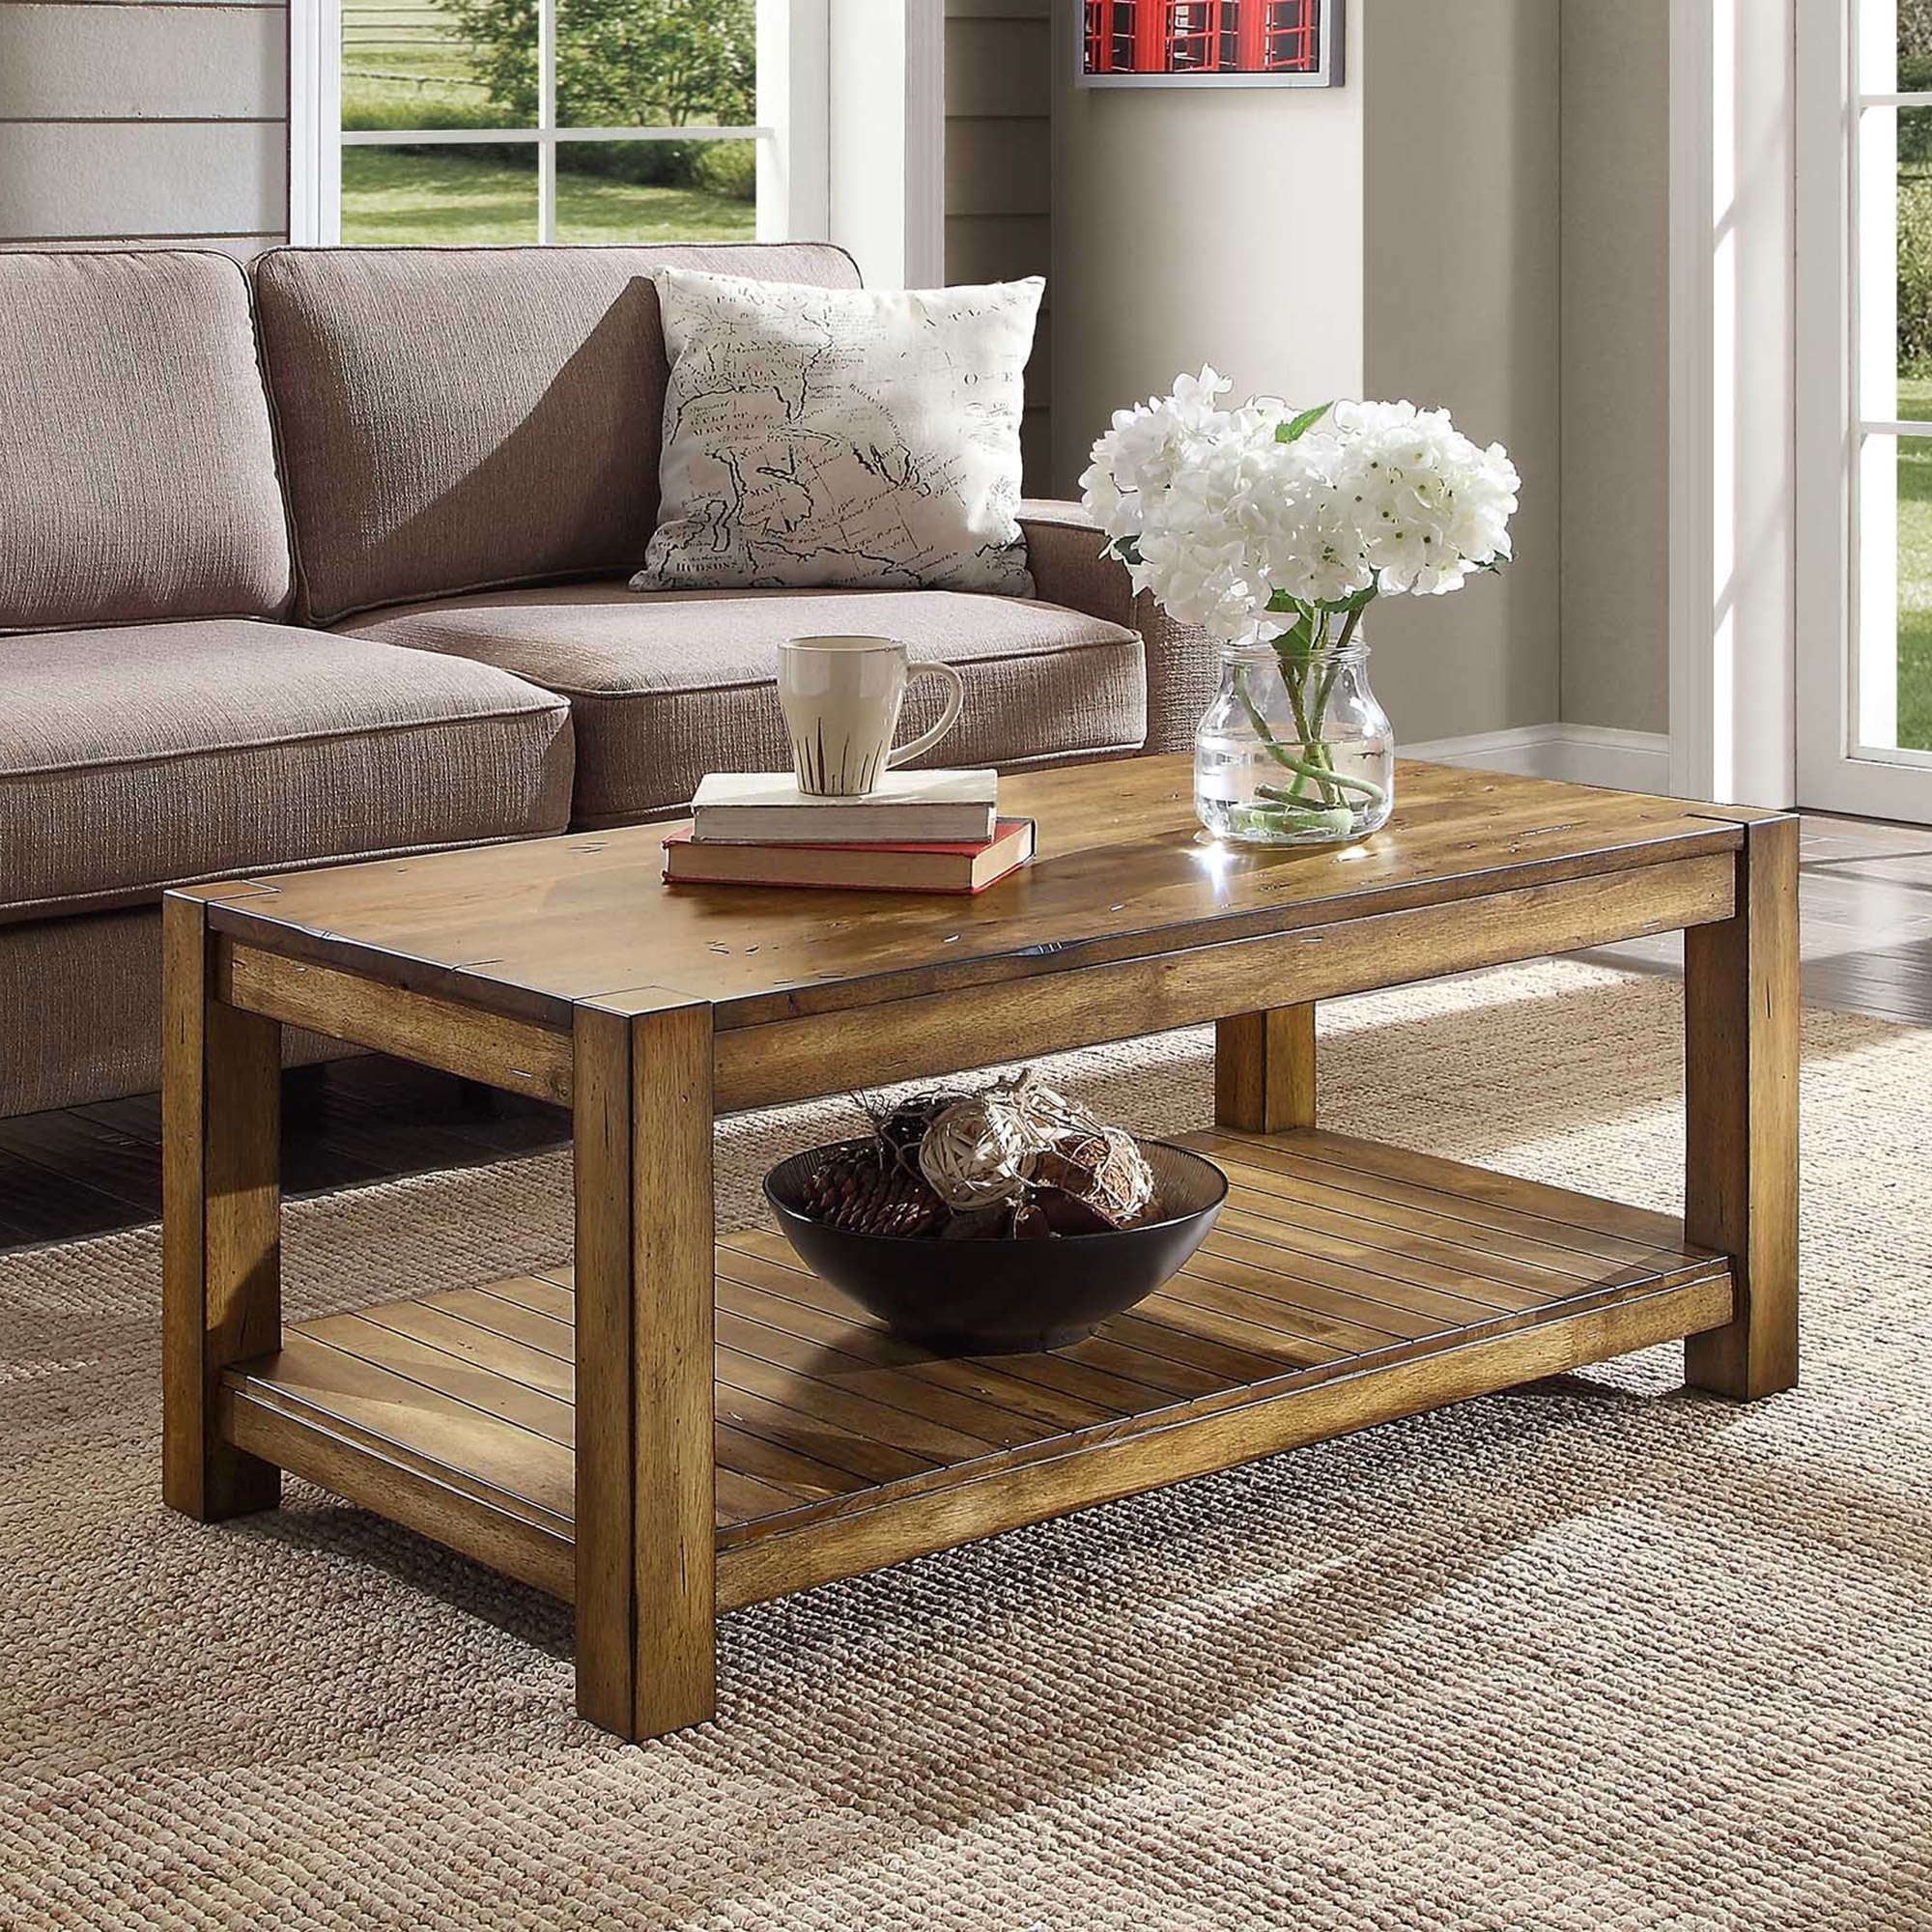 Bryant Solid Wood Coffee Table, Rustic Maple Brown Finish – Walmart With Regard To Rustic Wood Coffee Tables (View 4 of 21)